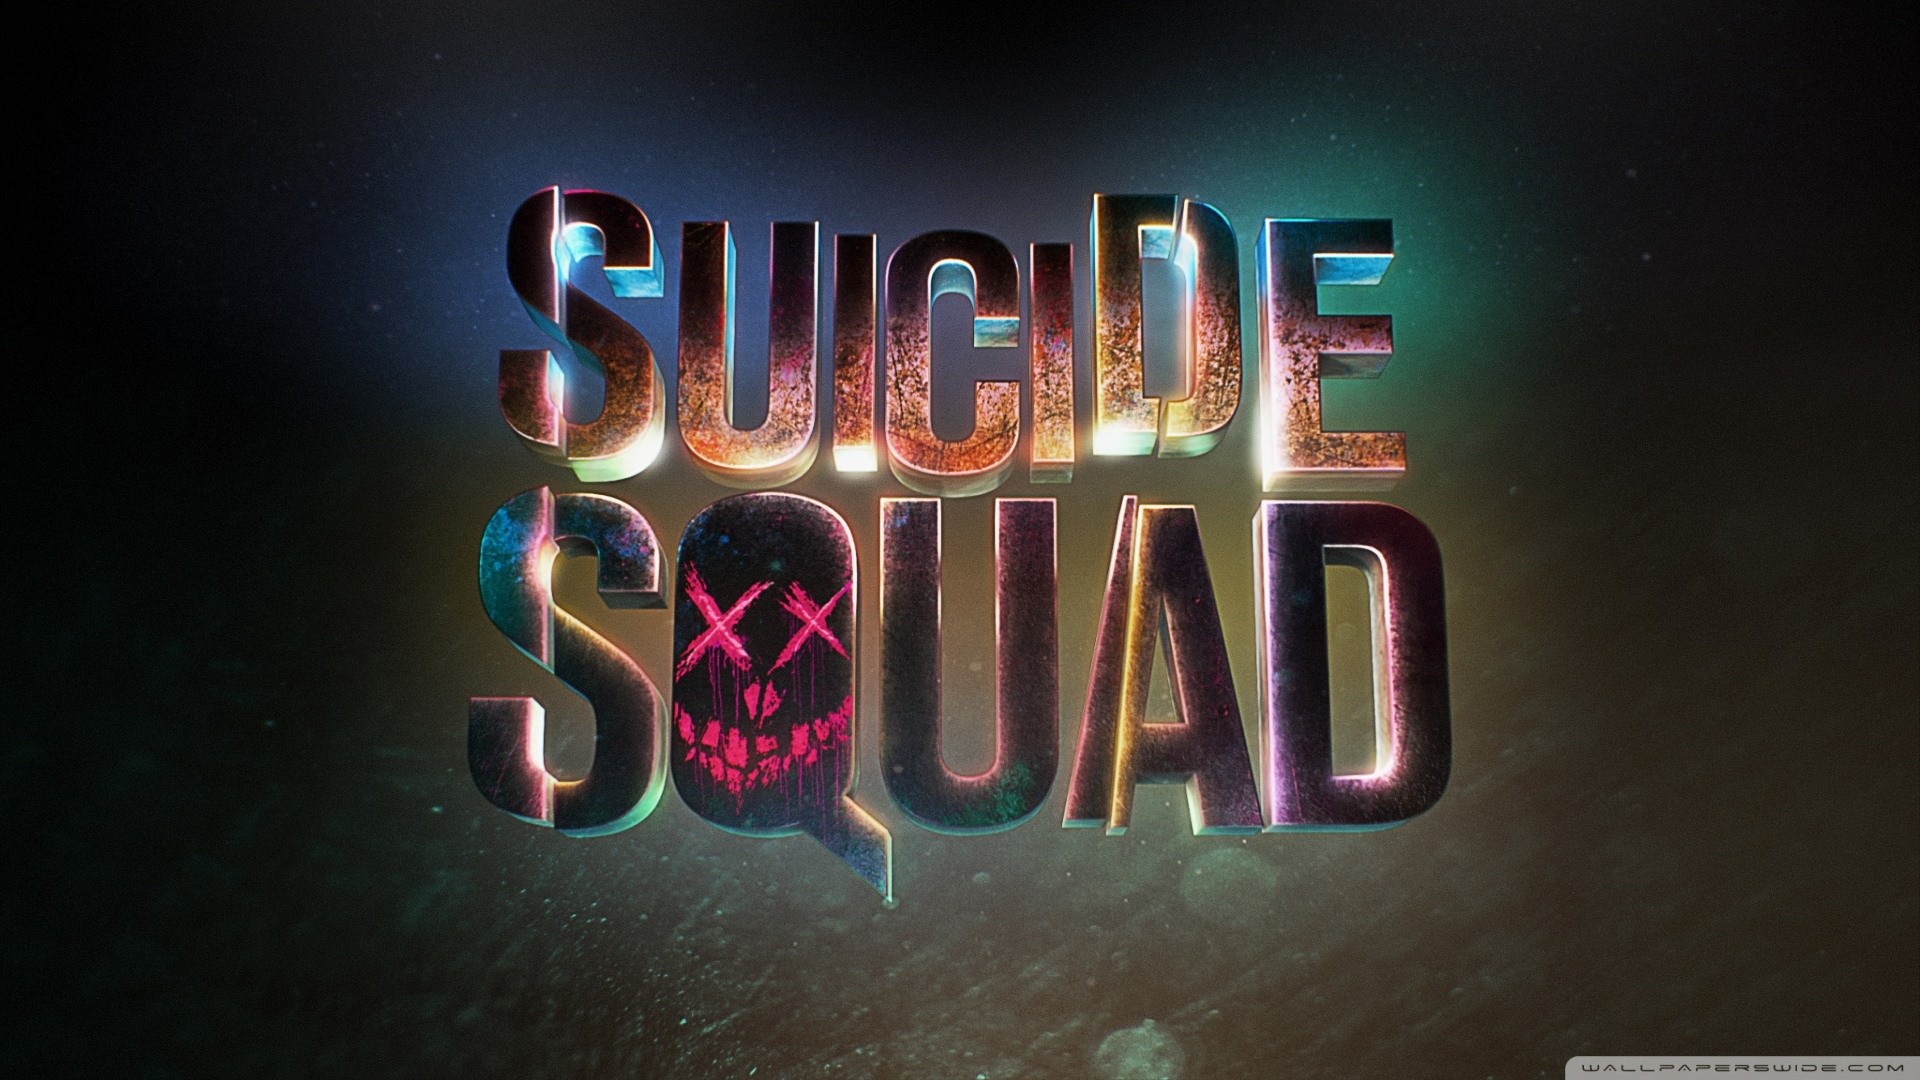 Suicide Squad HD Wide Wallpaper for Widescreen